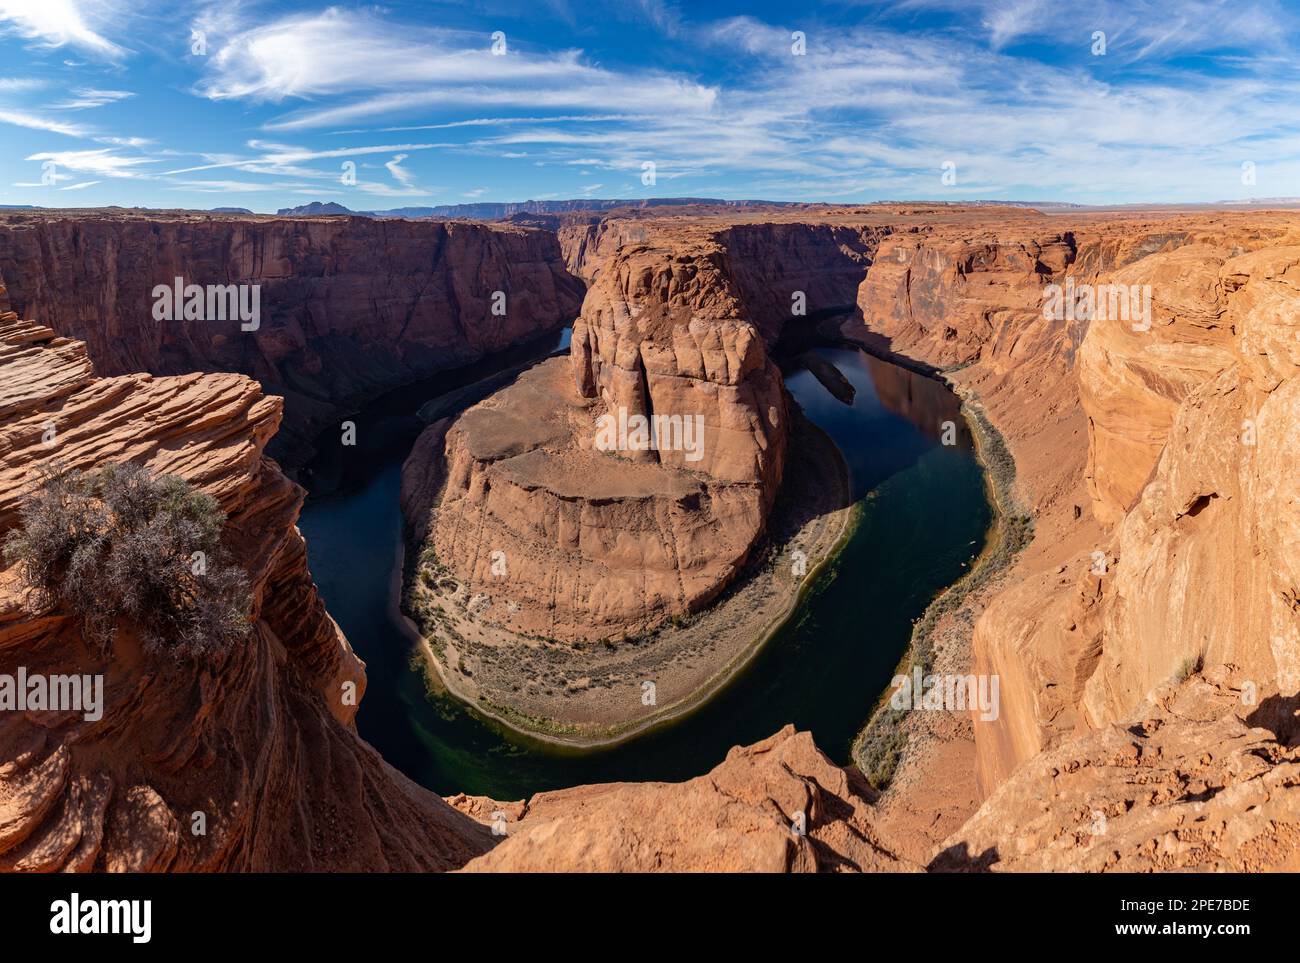 A picture of the Colorado River and the Grand Canyon landscape on the Horseshoe Bend. Stock Photo